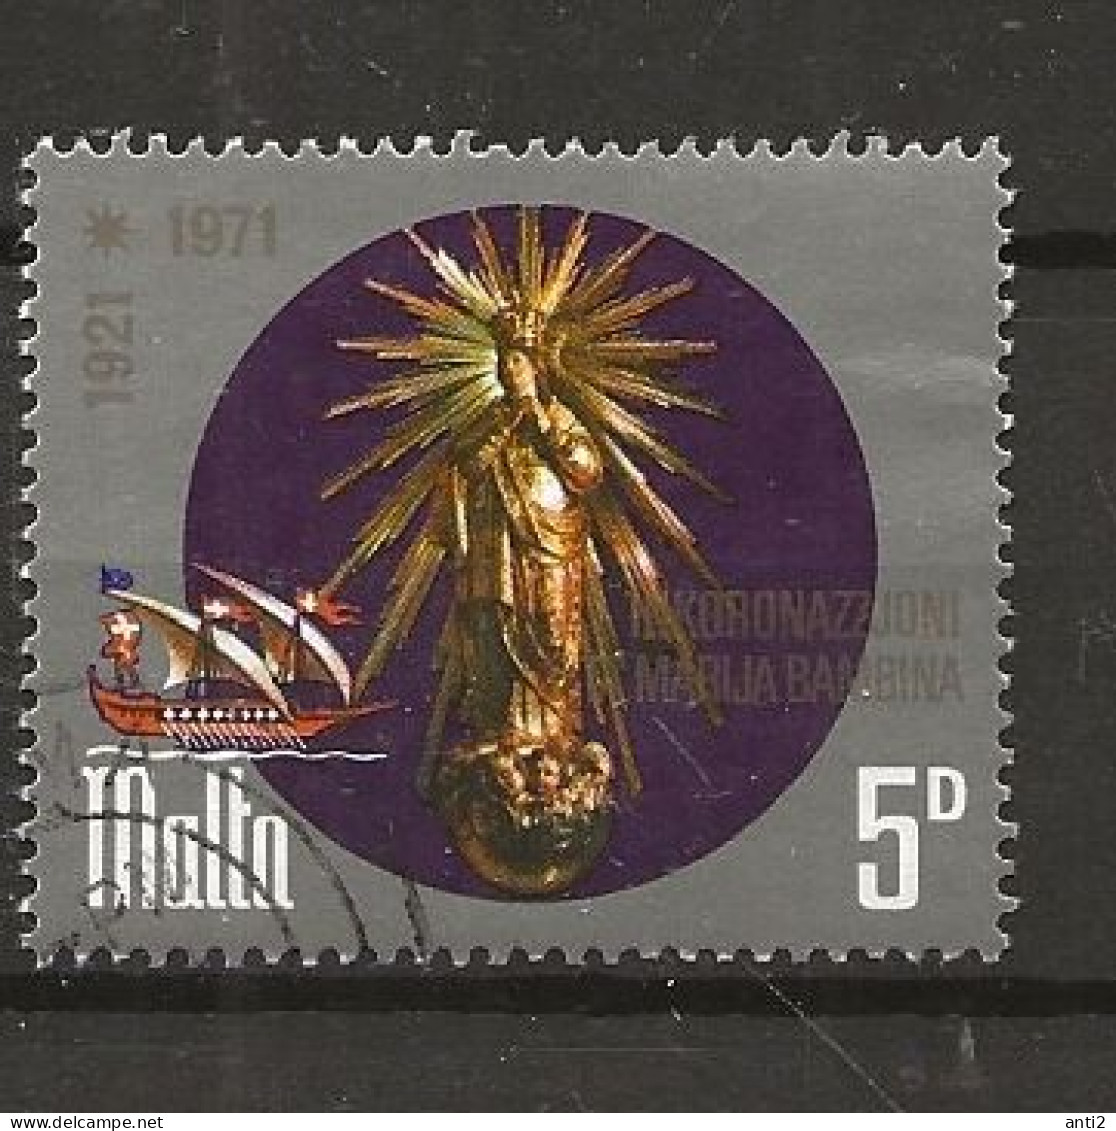 Malta 1971 5th Anniversary Of The Coronation Of "Our Lady Of Victories" Mi 426 Cancelled(o) - Malte